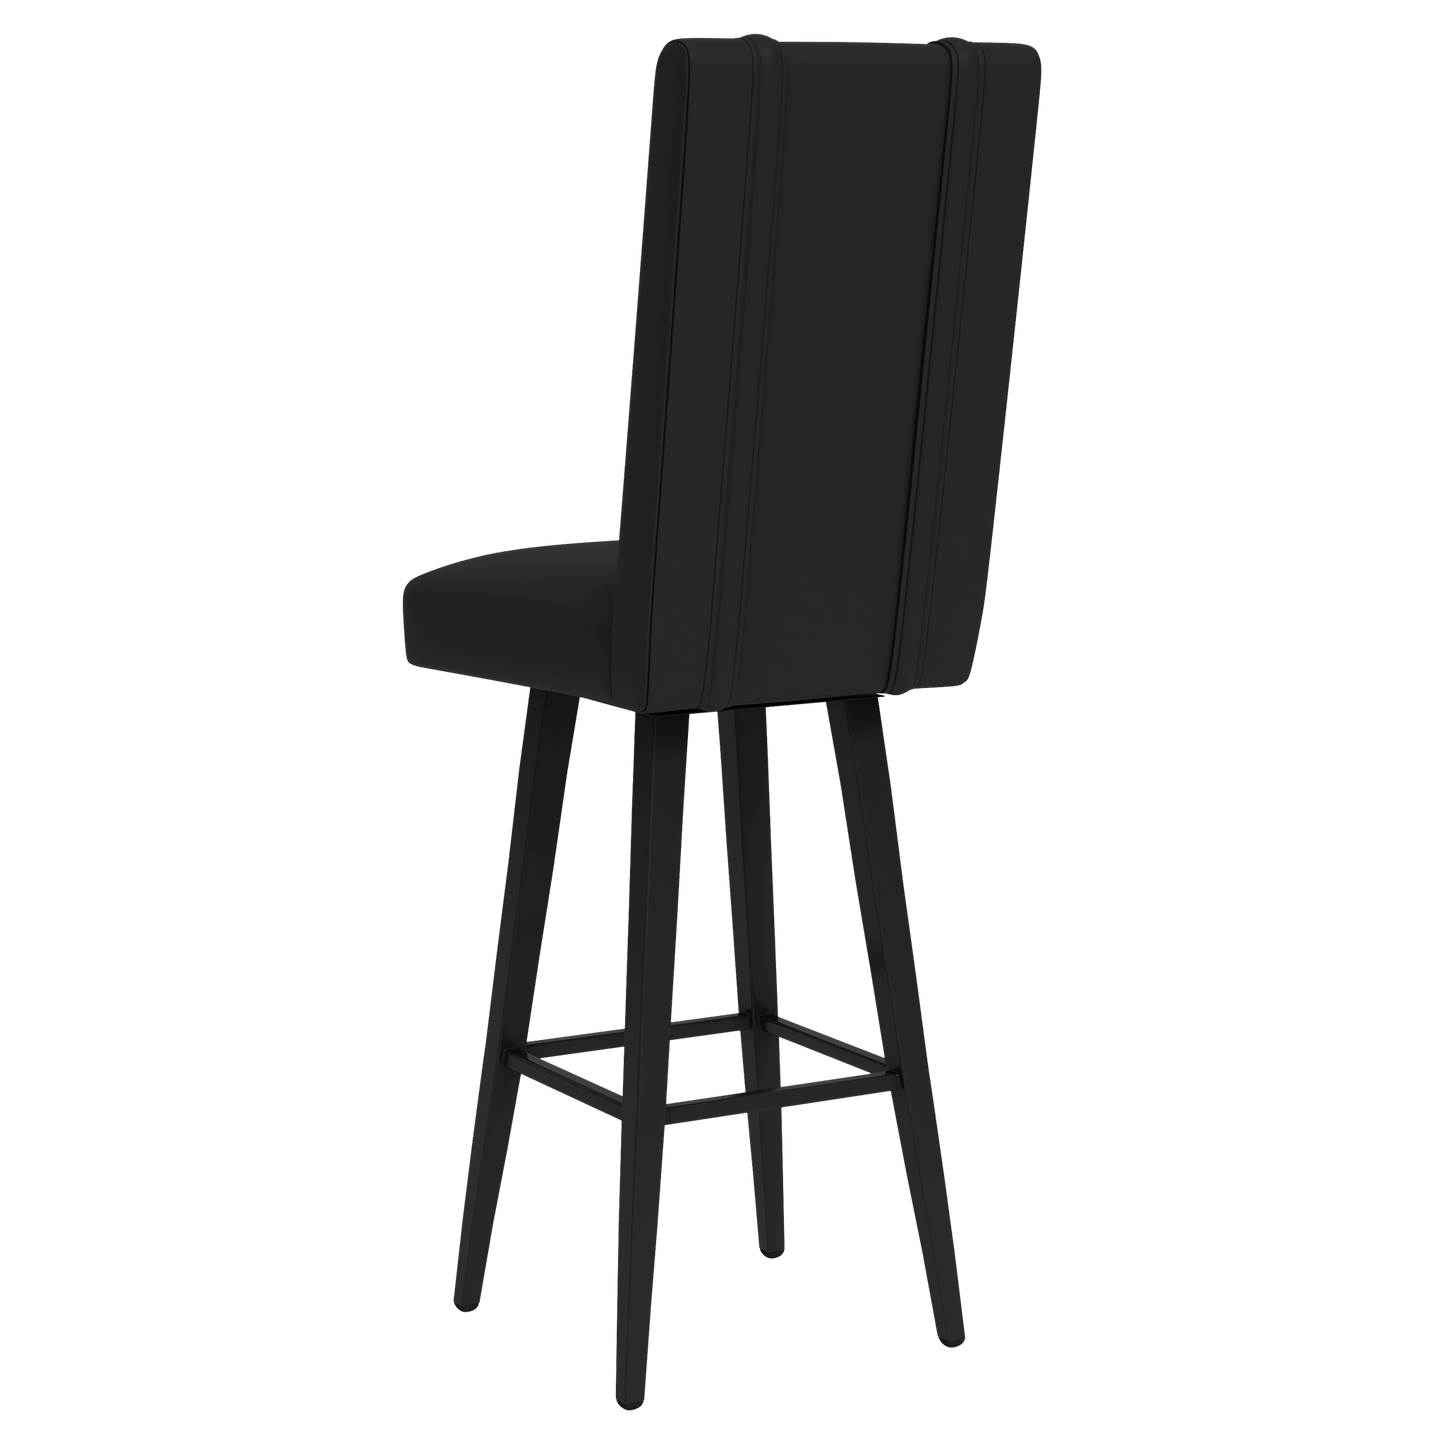 Swivel Bar Stool 2000 with Cleveland Browns Classic Logo